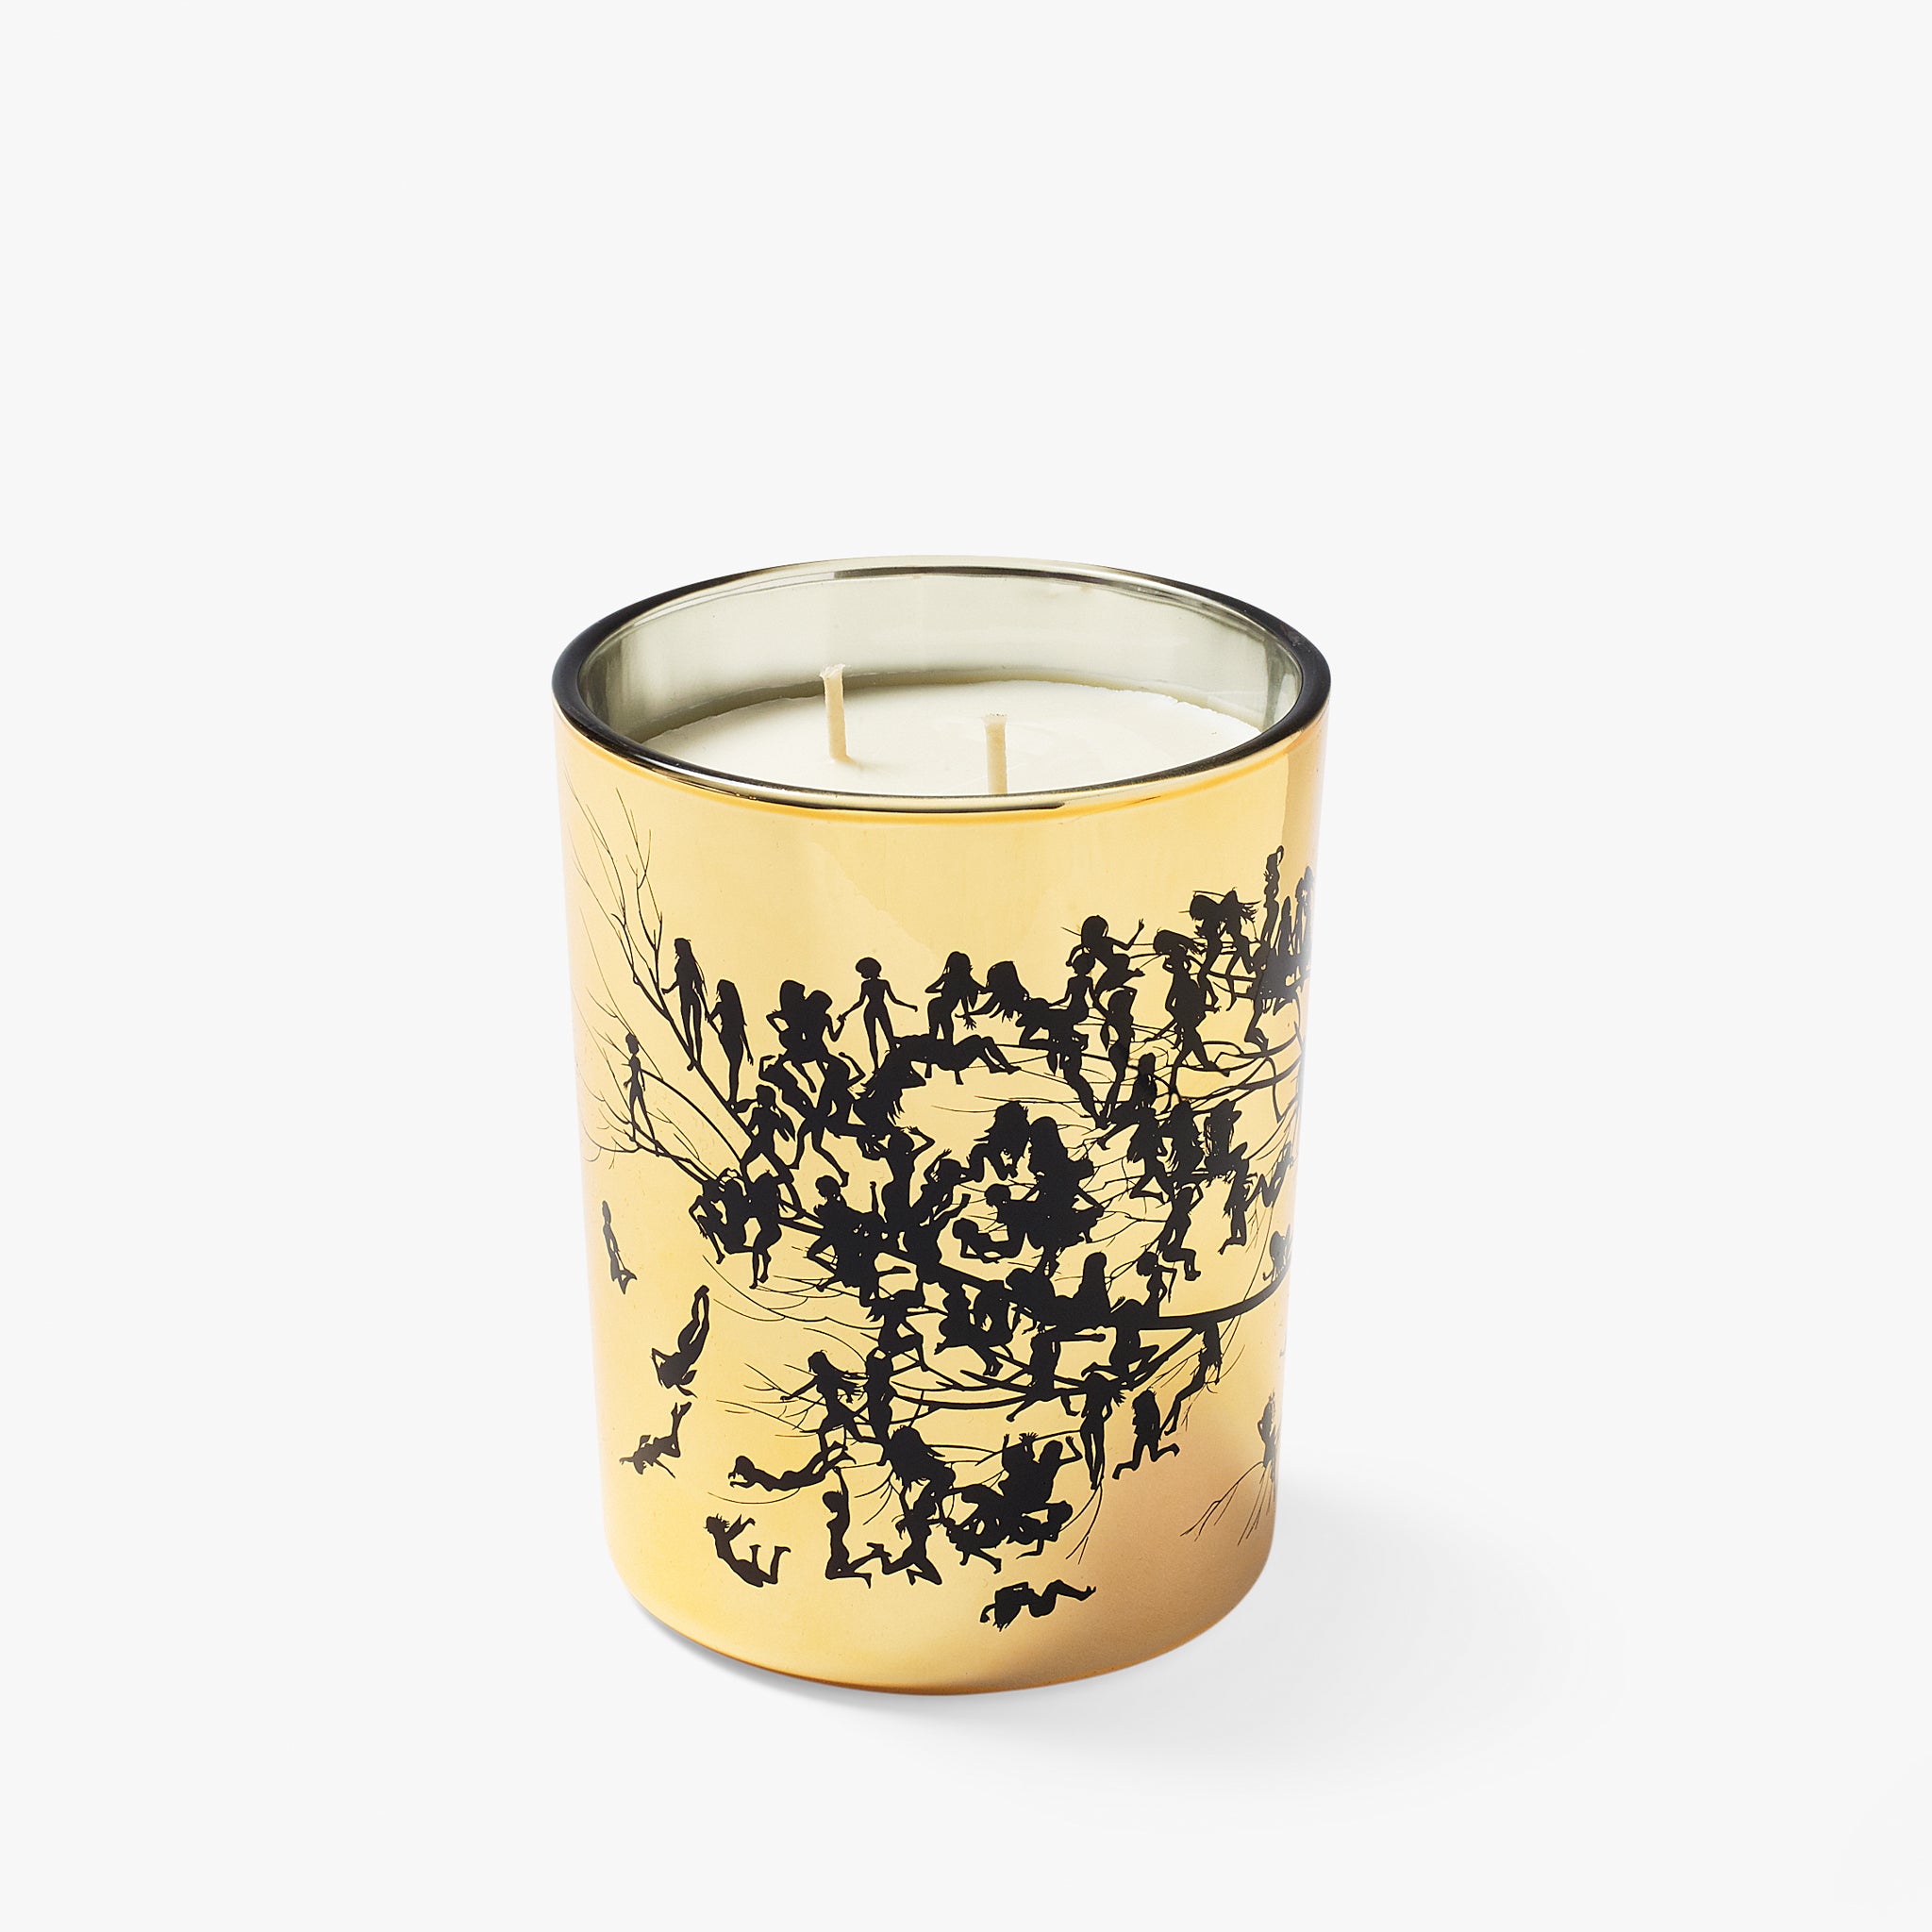 Light My Fire gold and black candle